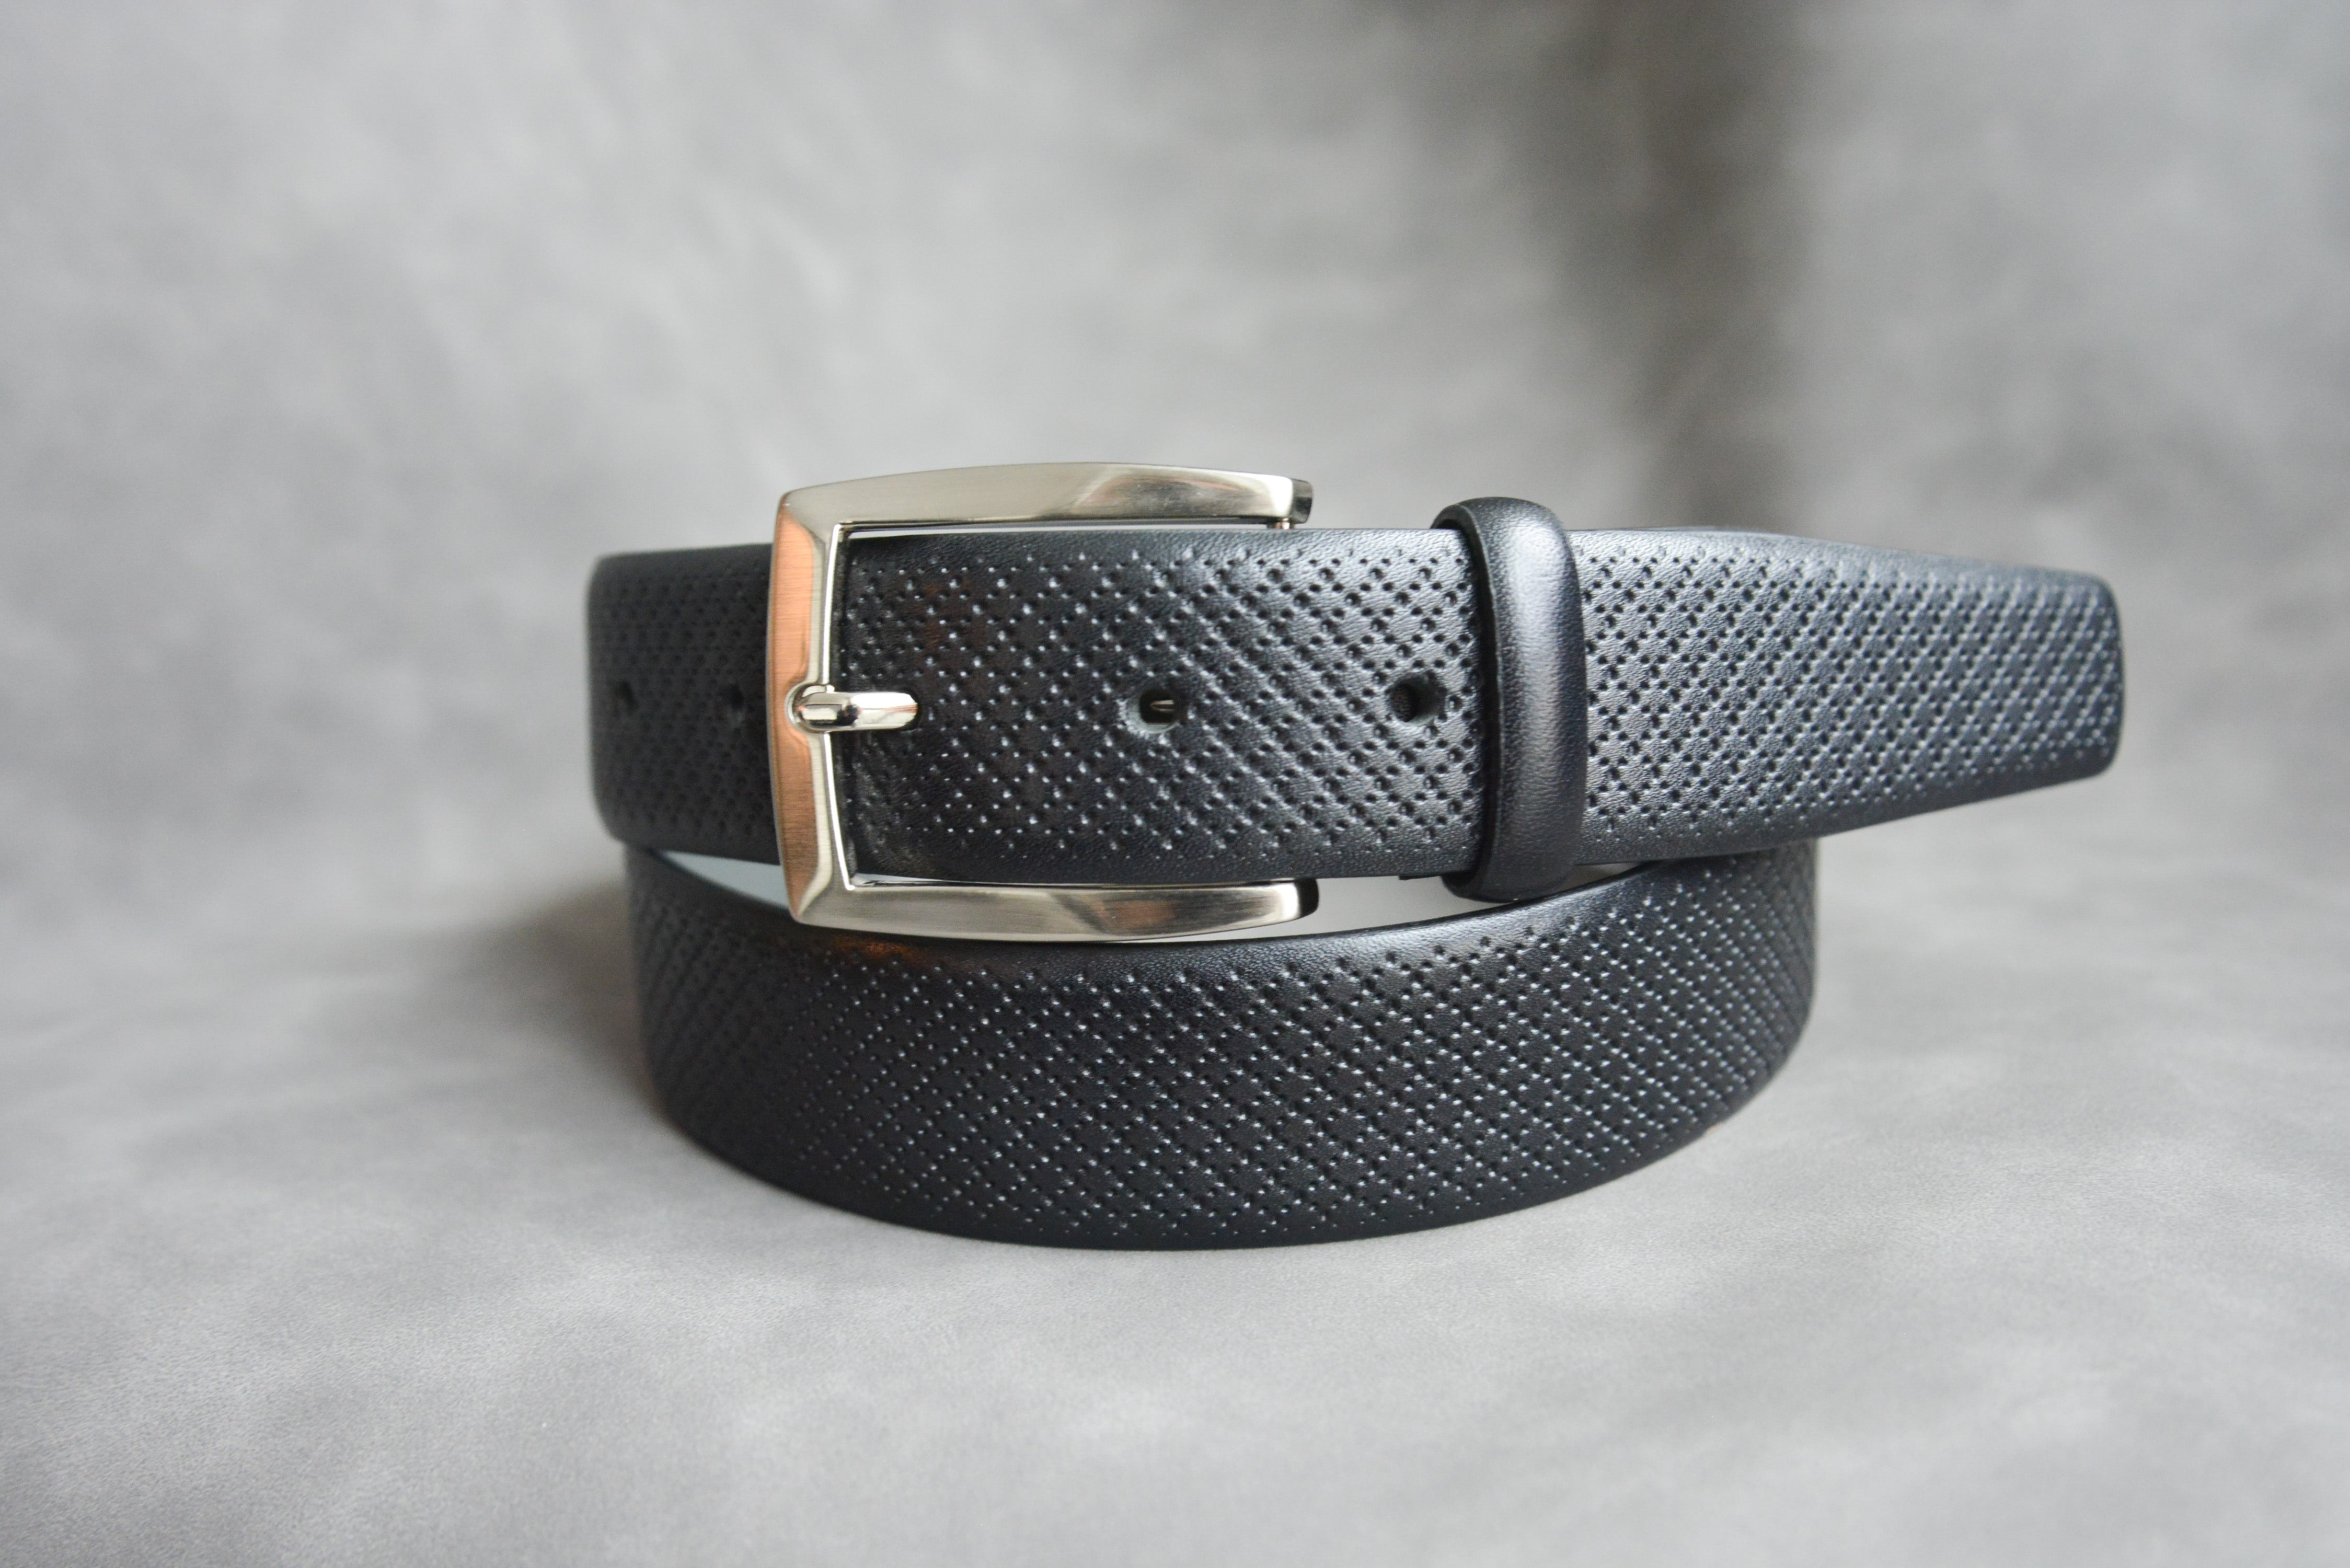 This Marcello Sport belt features premium leather with diagonal perforation, offering an elegant and stylish look for casual everyday wear. The classic silhouette is accentuated by a satin nickel finished buckle and is available in sizes 32 - 44.